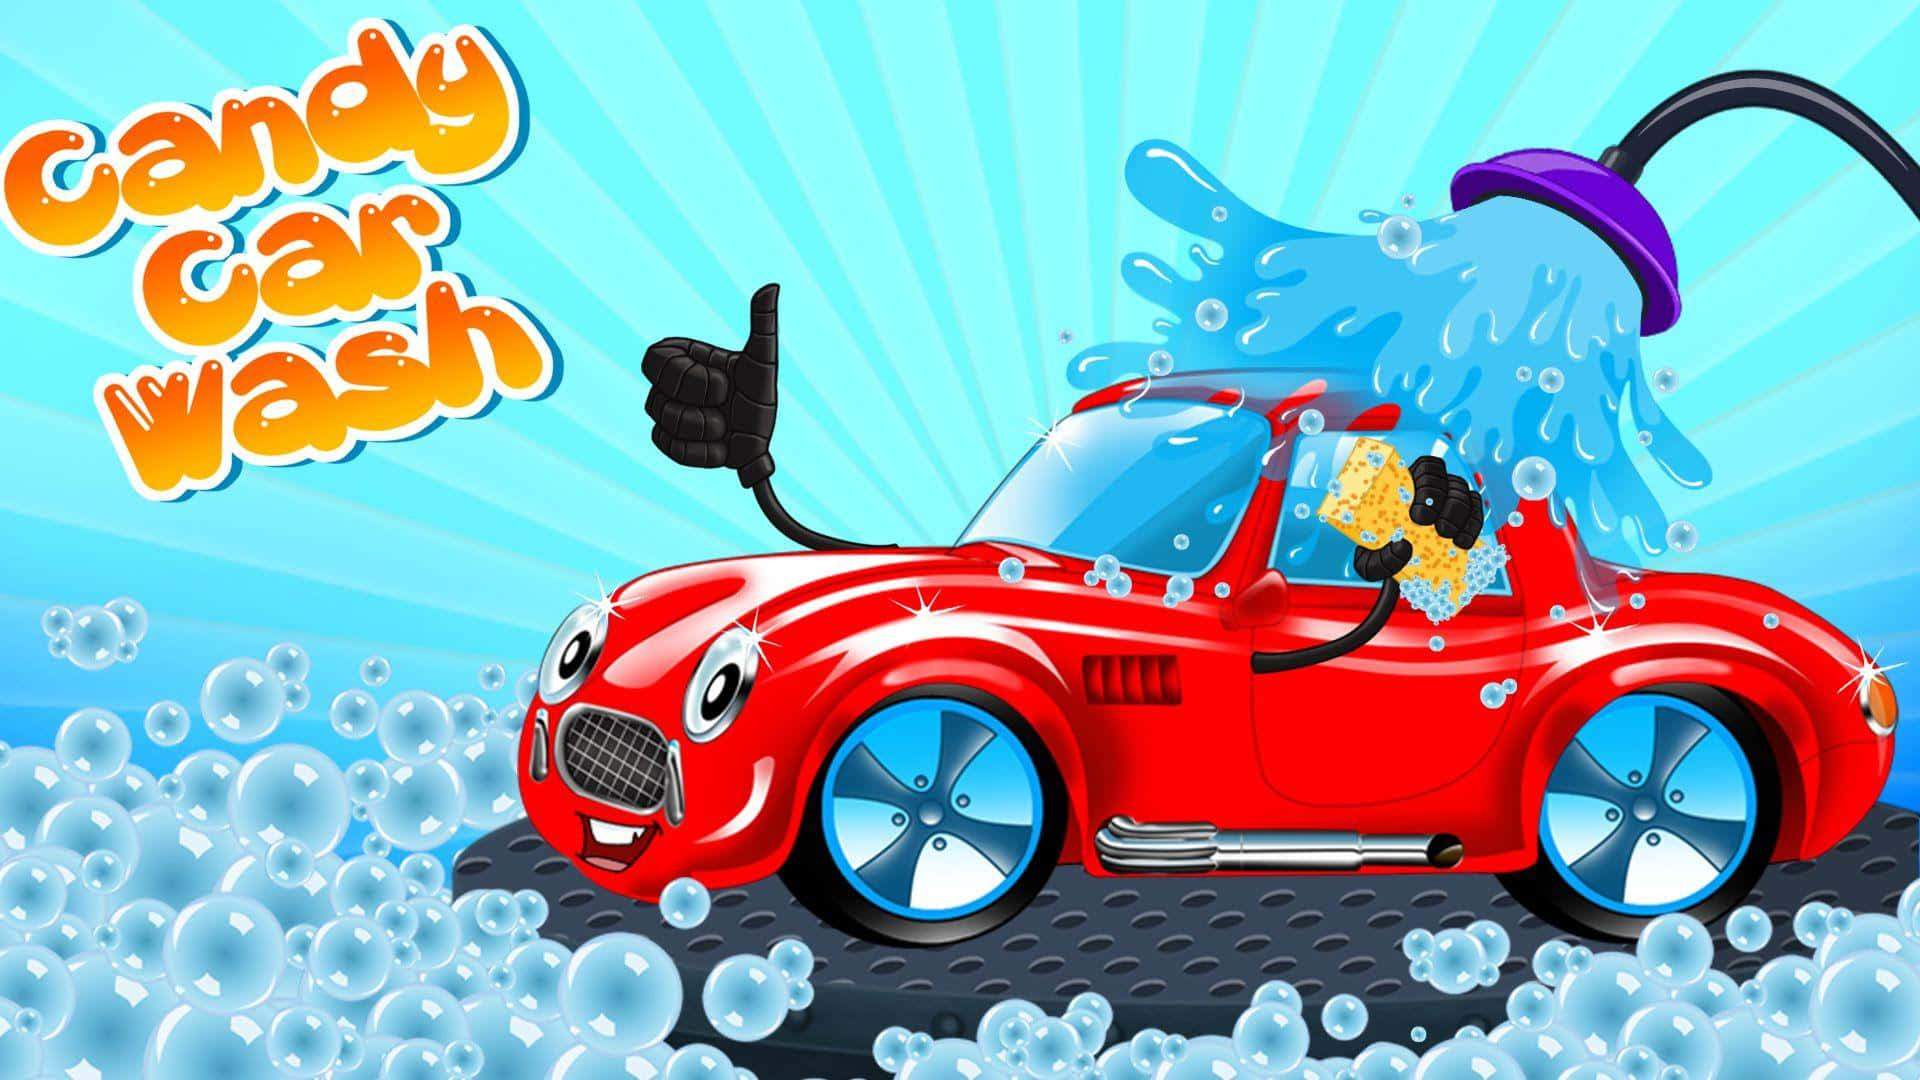 Get your car squeaky clean with a professional car wash.